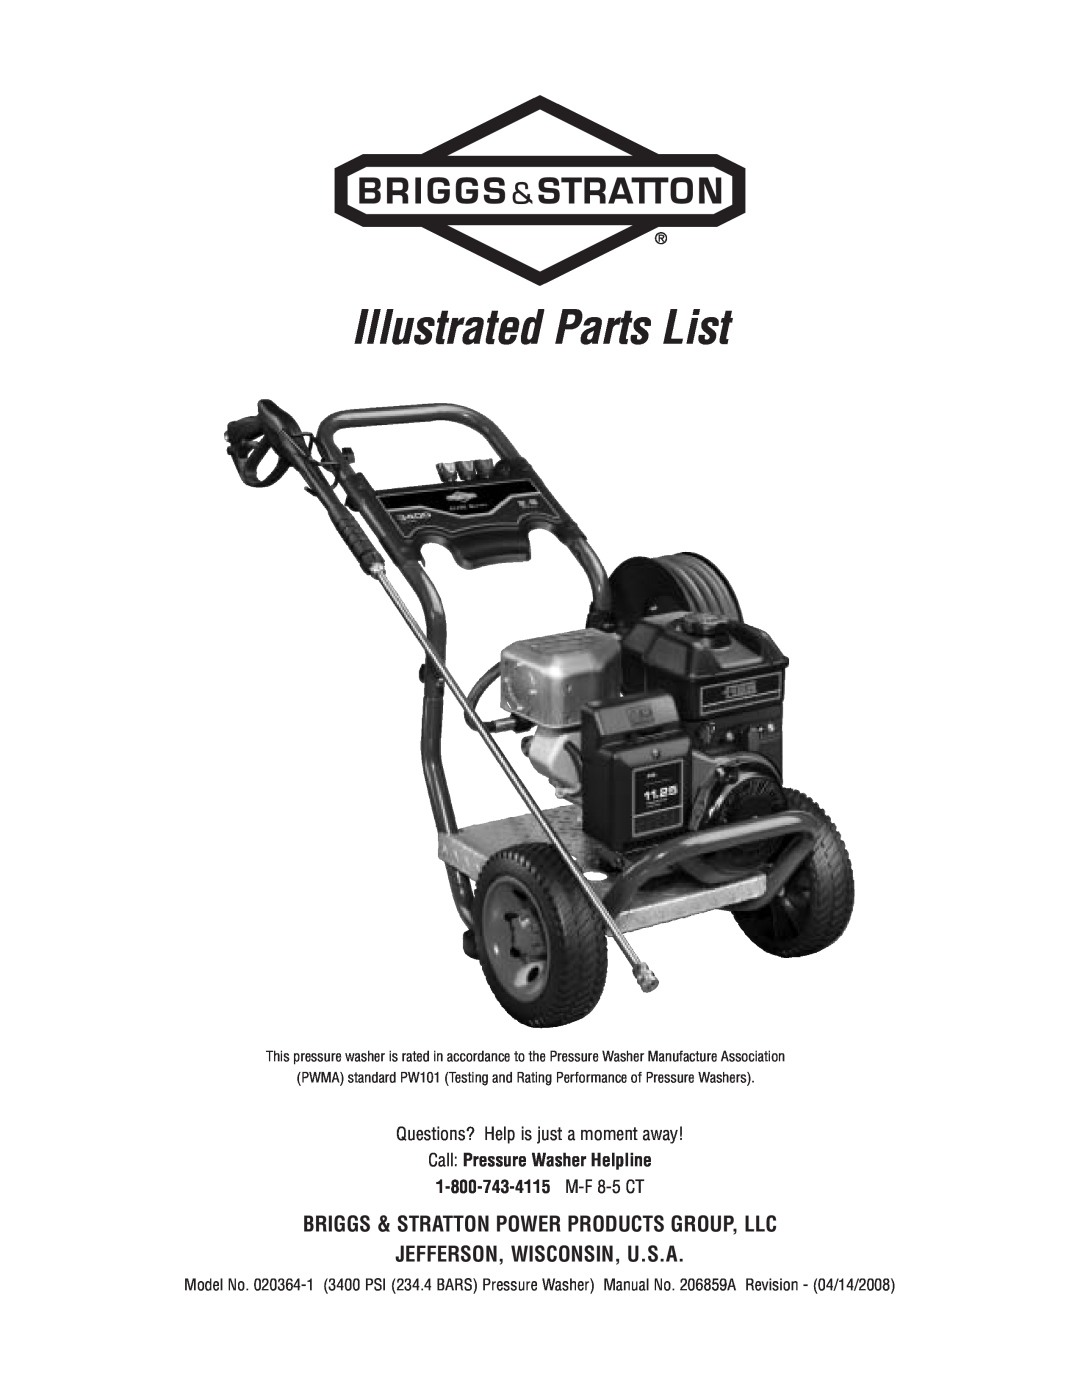 Briggs & Stratton 020364-1 manual Illustrated Parts List, Briggs & Stratton Power Products Group, Llc 